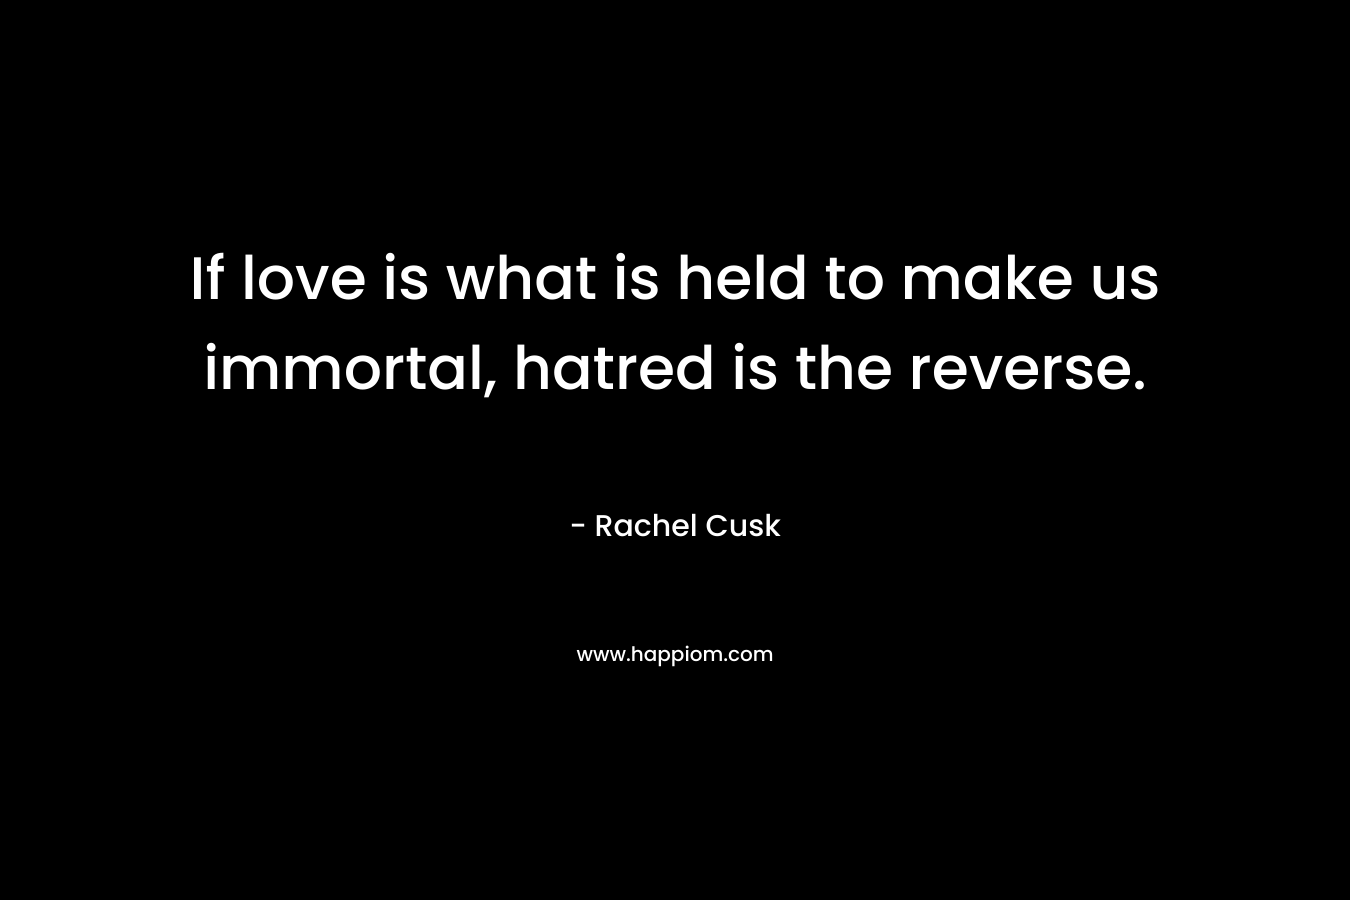 If love is what is held to make us immortal, hatred is the reverse. – Rachel Cusk